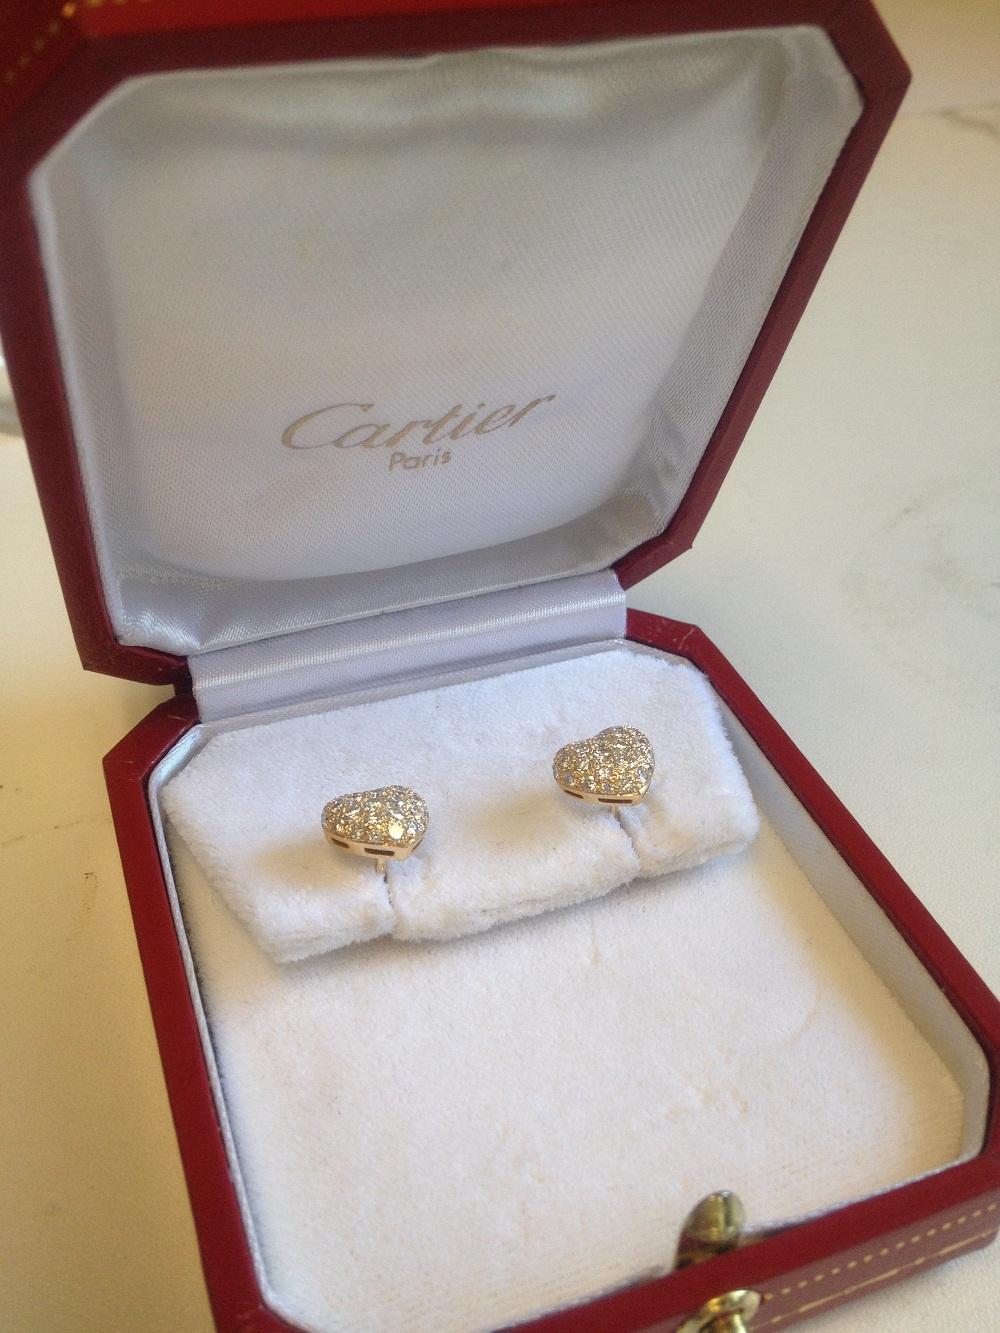 Cartier 18k Yellow Pave Diamond Heart Earrings french clutch backs  W/ Box and Receipt,  Estimated Retail Replacement $16,000.00.

Description:  18K yellow gold and pave diamond hear shaped earrings signed by Cartier with serial #'s. They feature